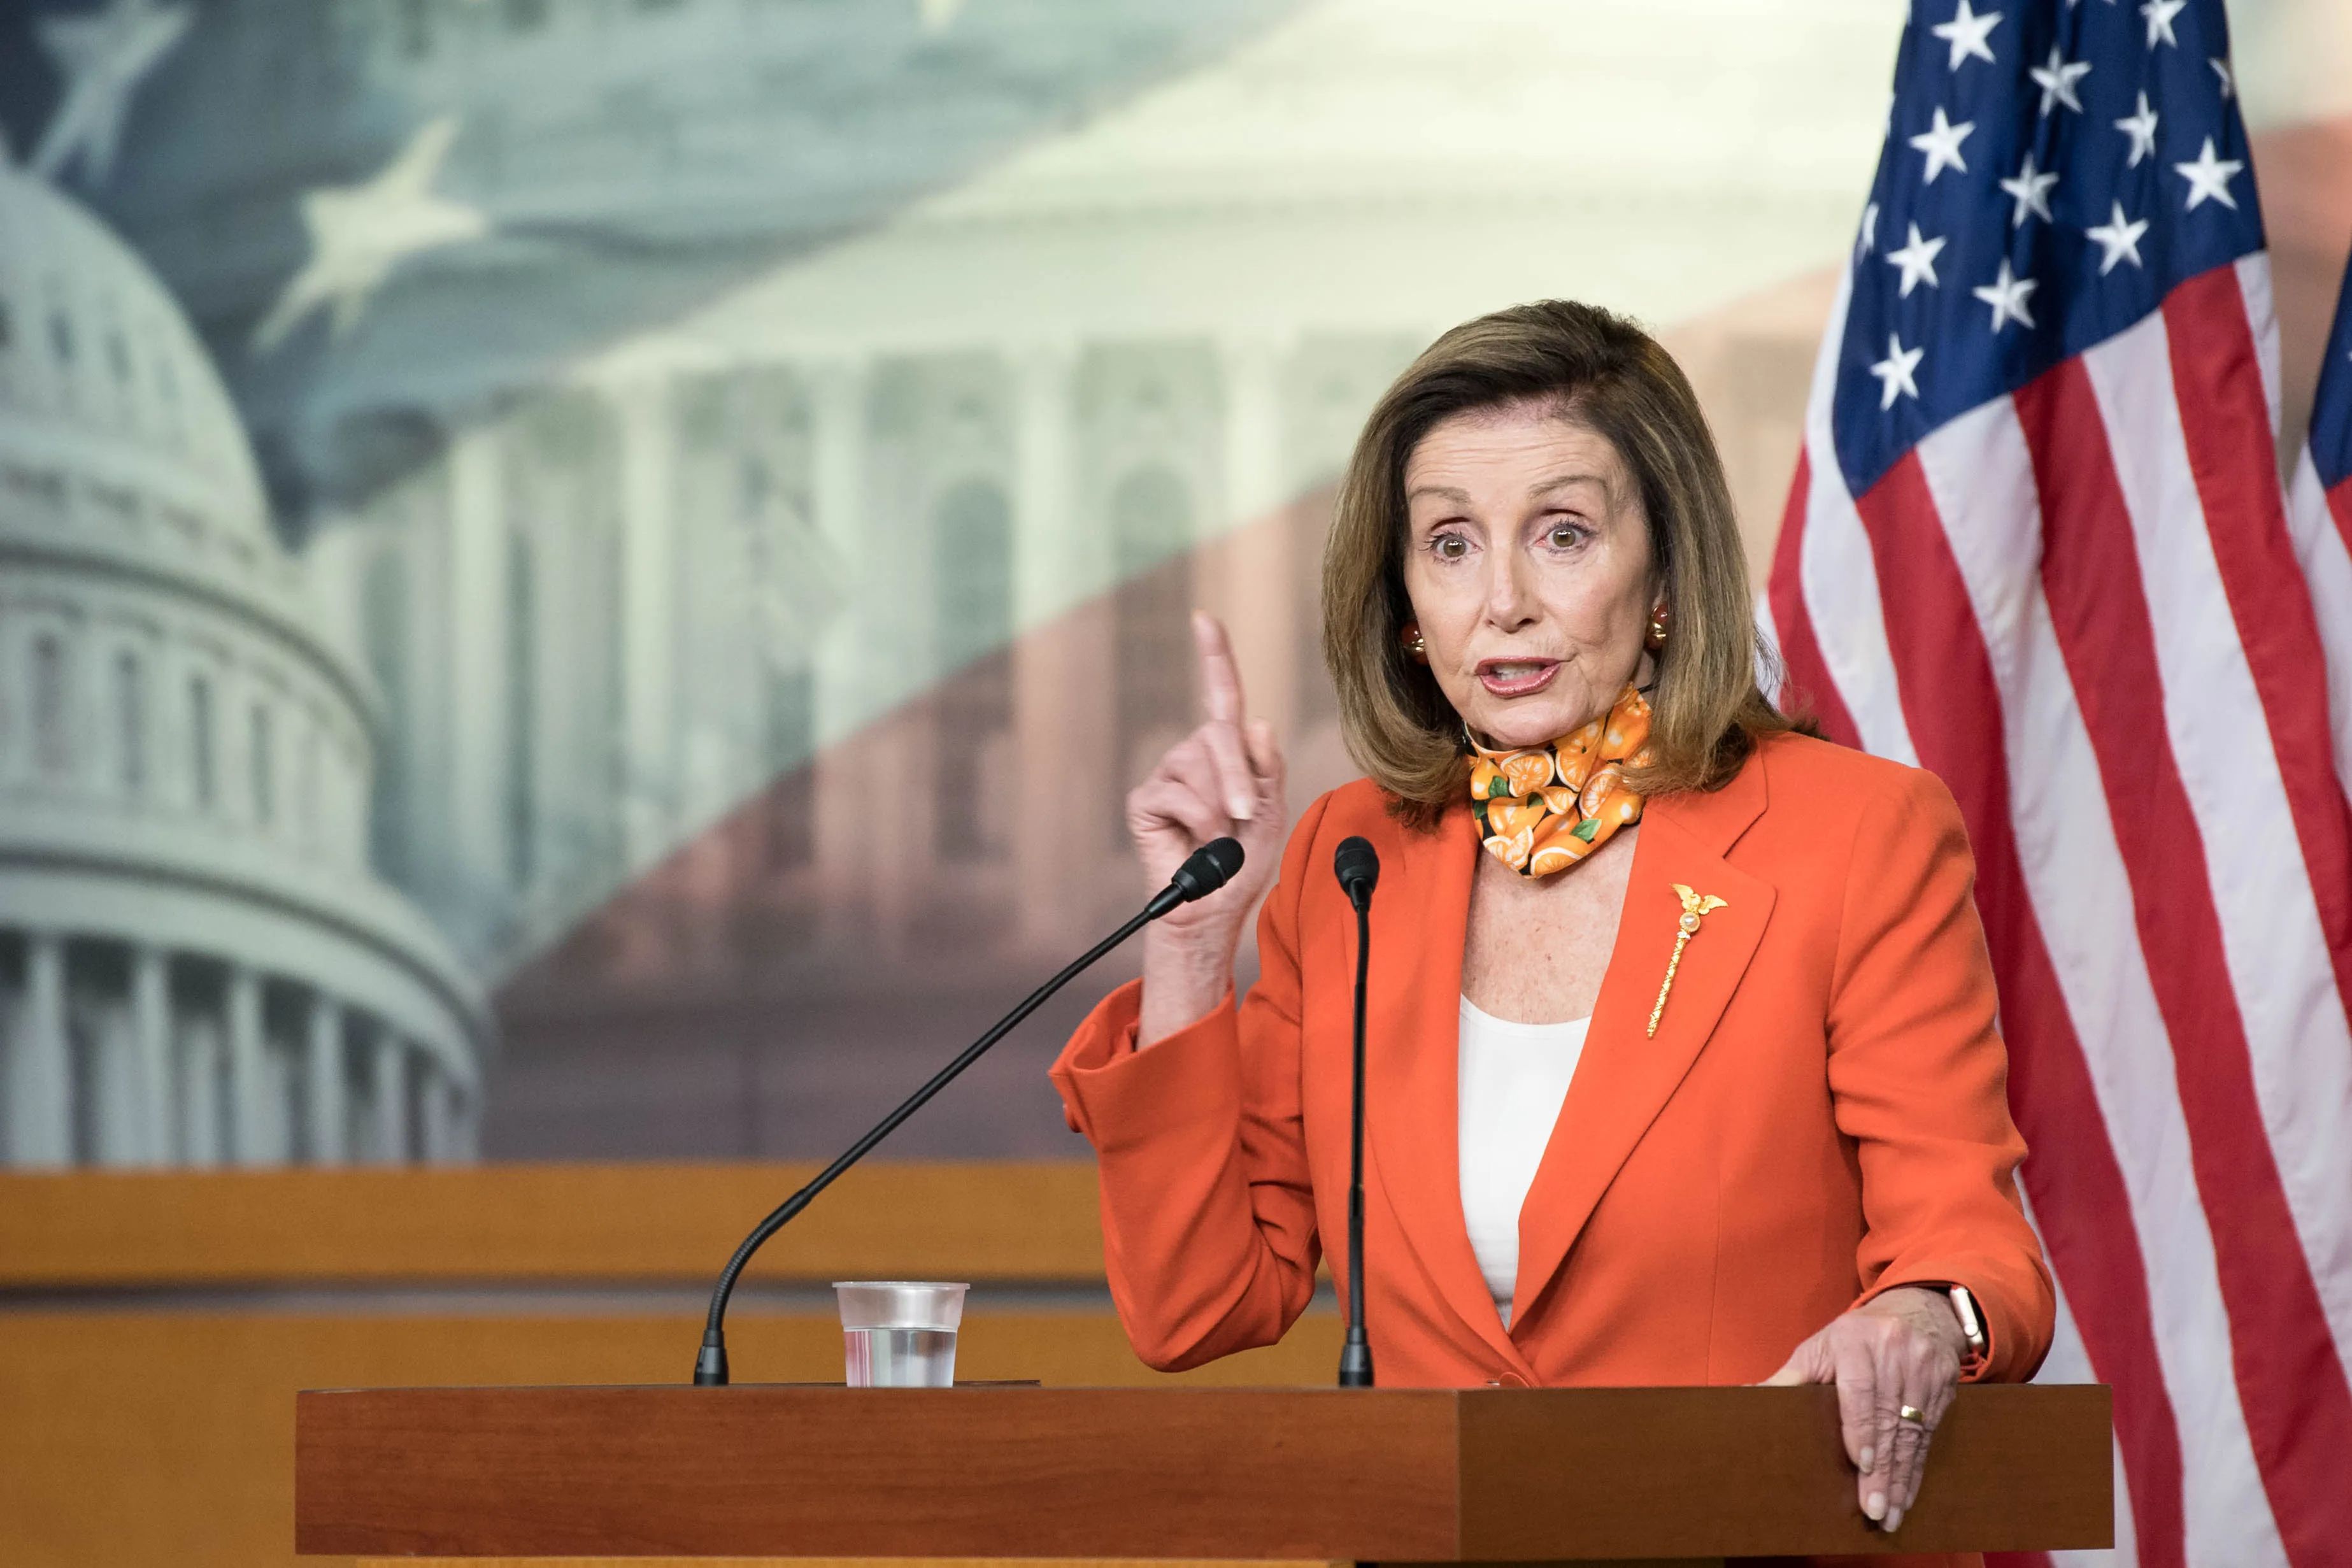 Speaker of the House of Representatives Nancy Pelosi speaks at a press conference.